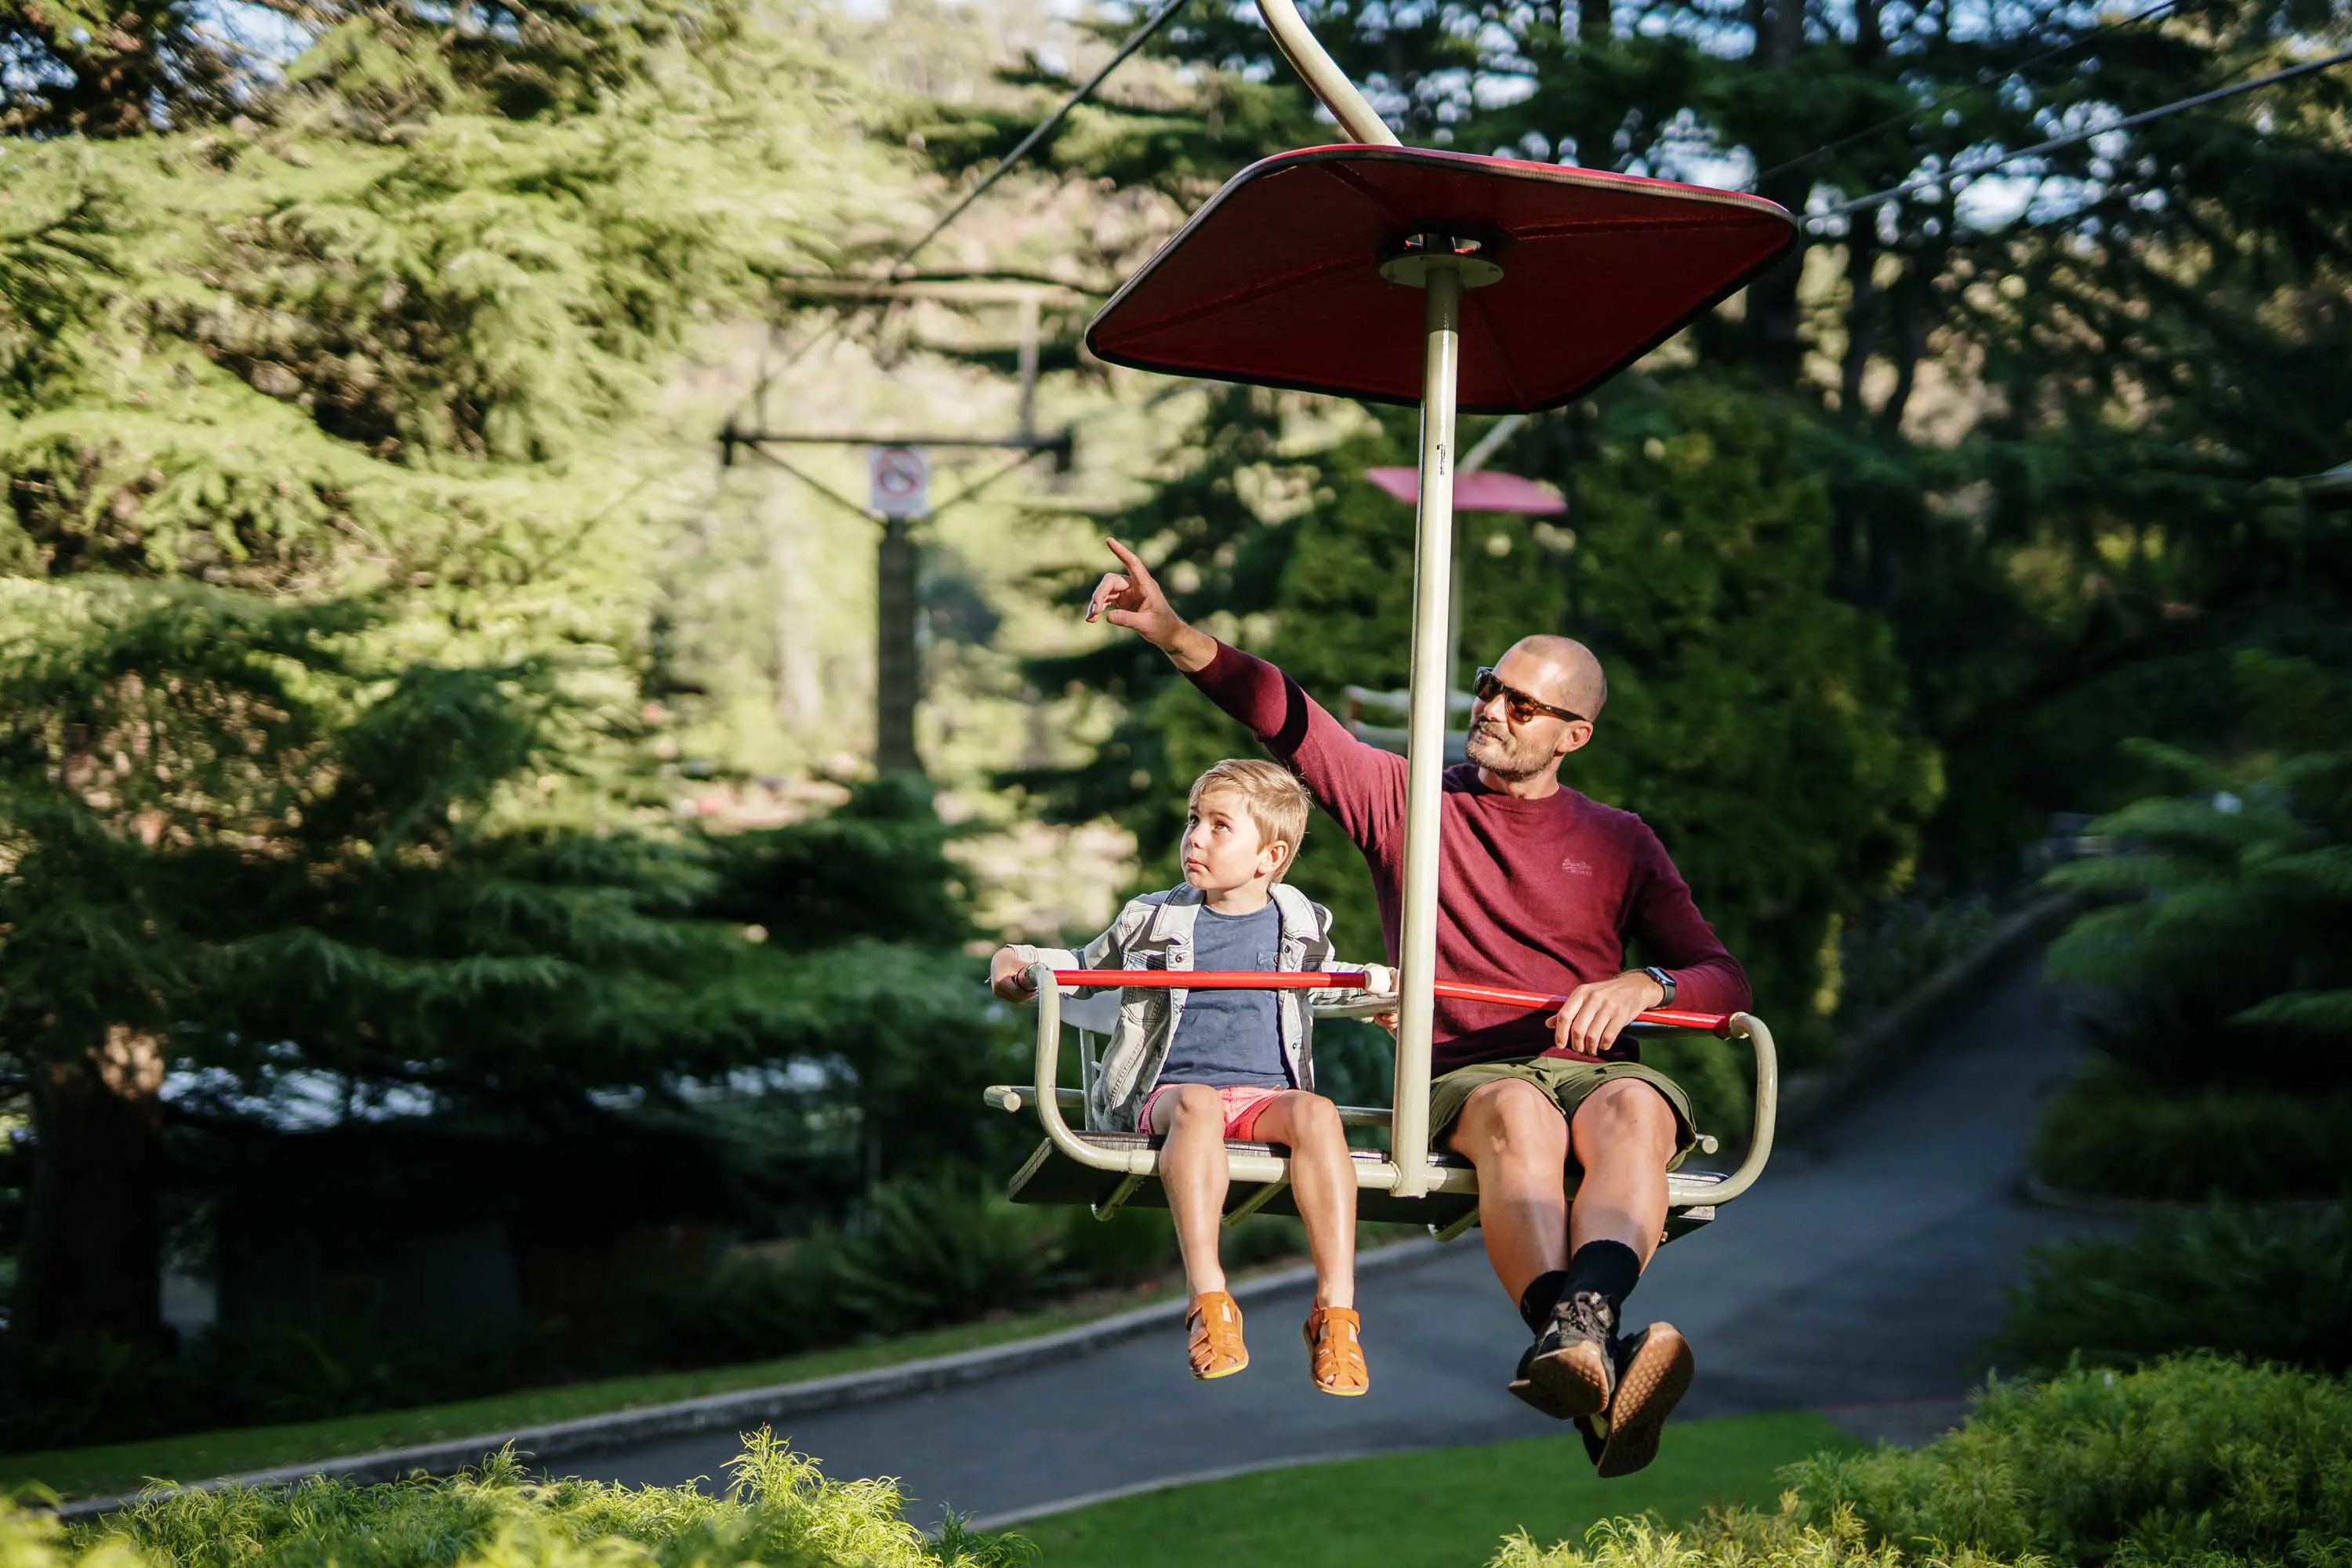 A father and his young son ride the chair lift above a garden.